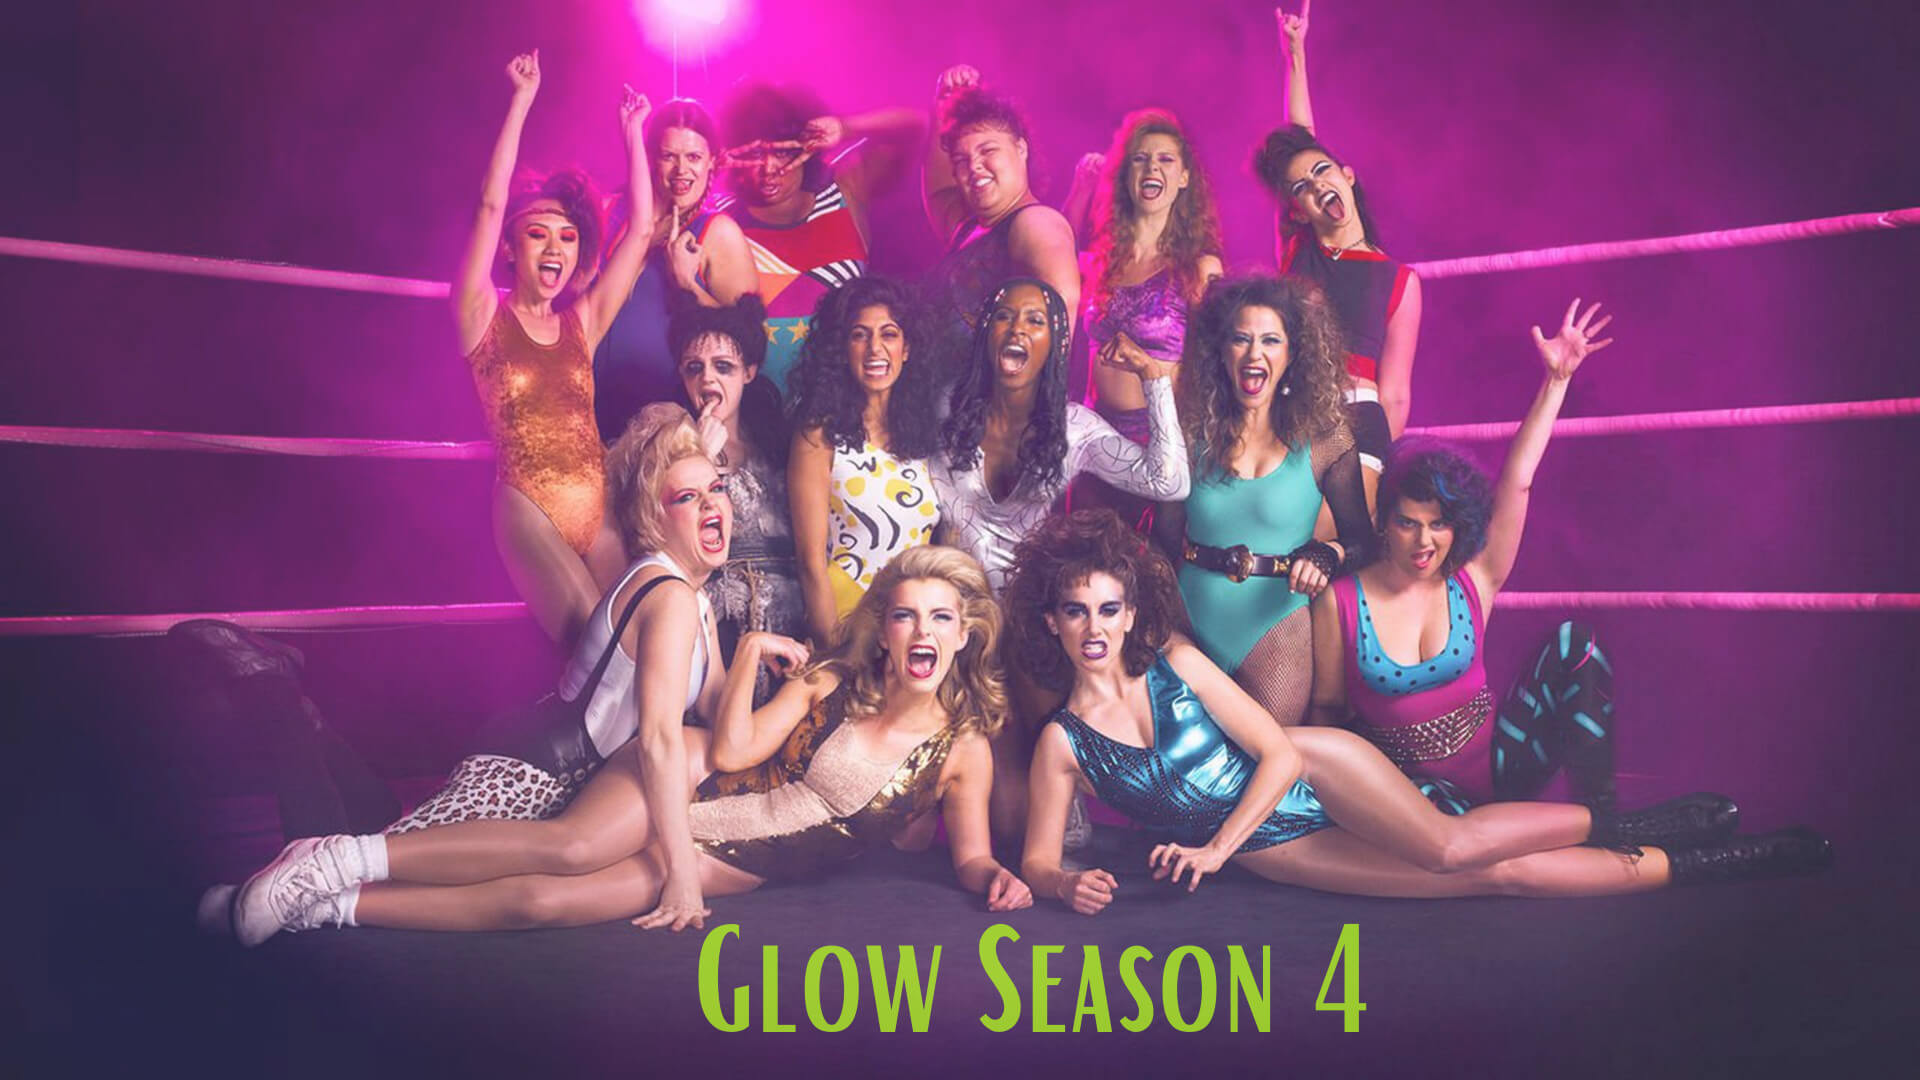 Is There Any News Glow Season 4 Trailer?